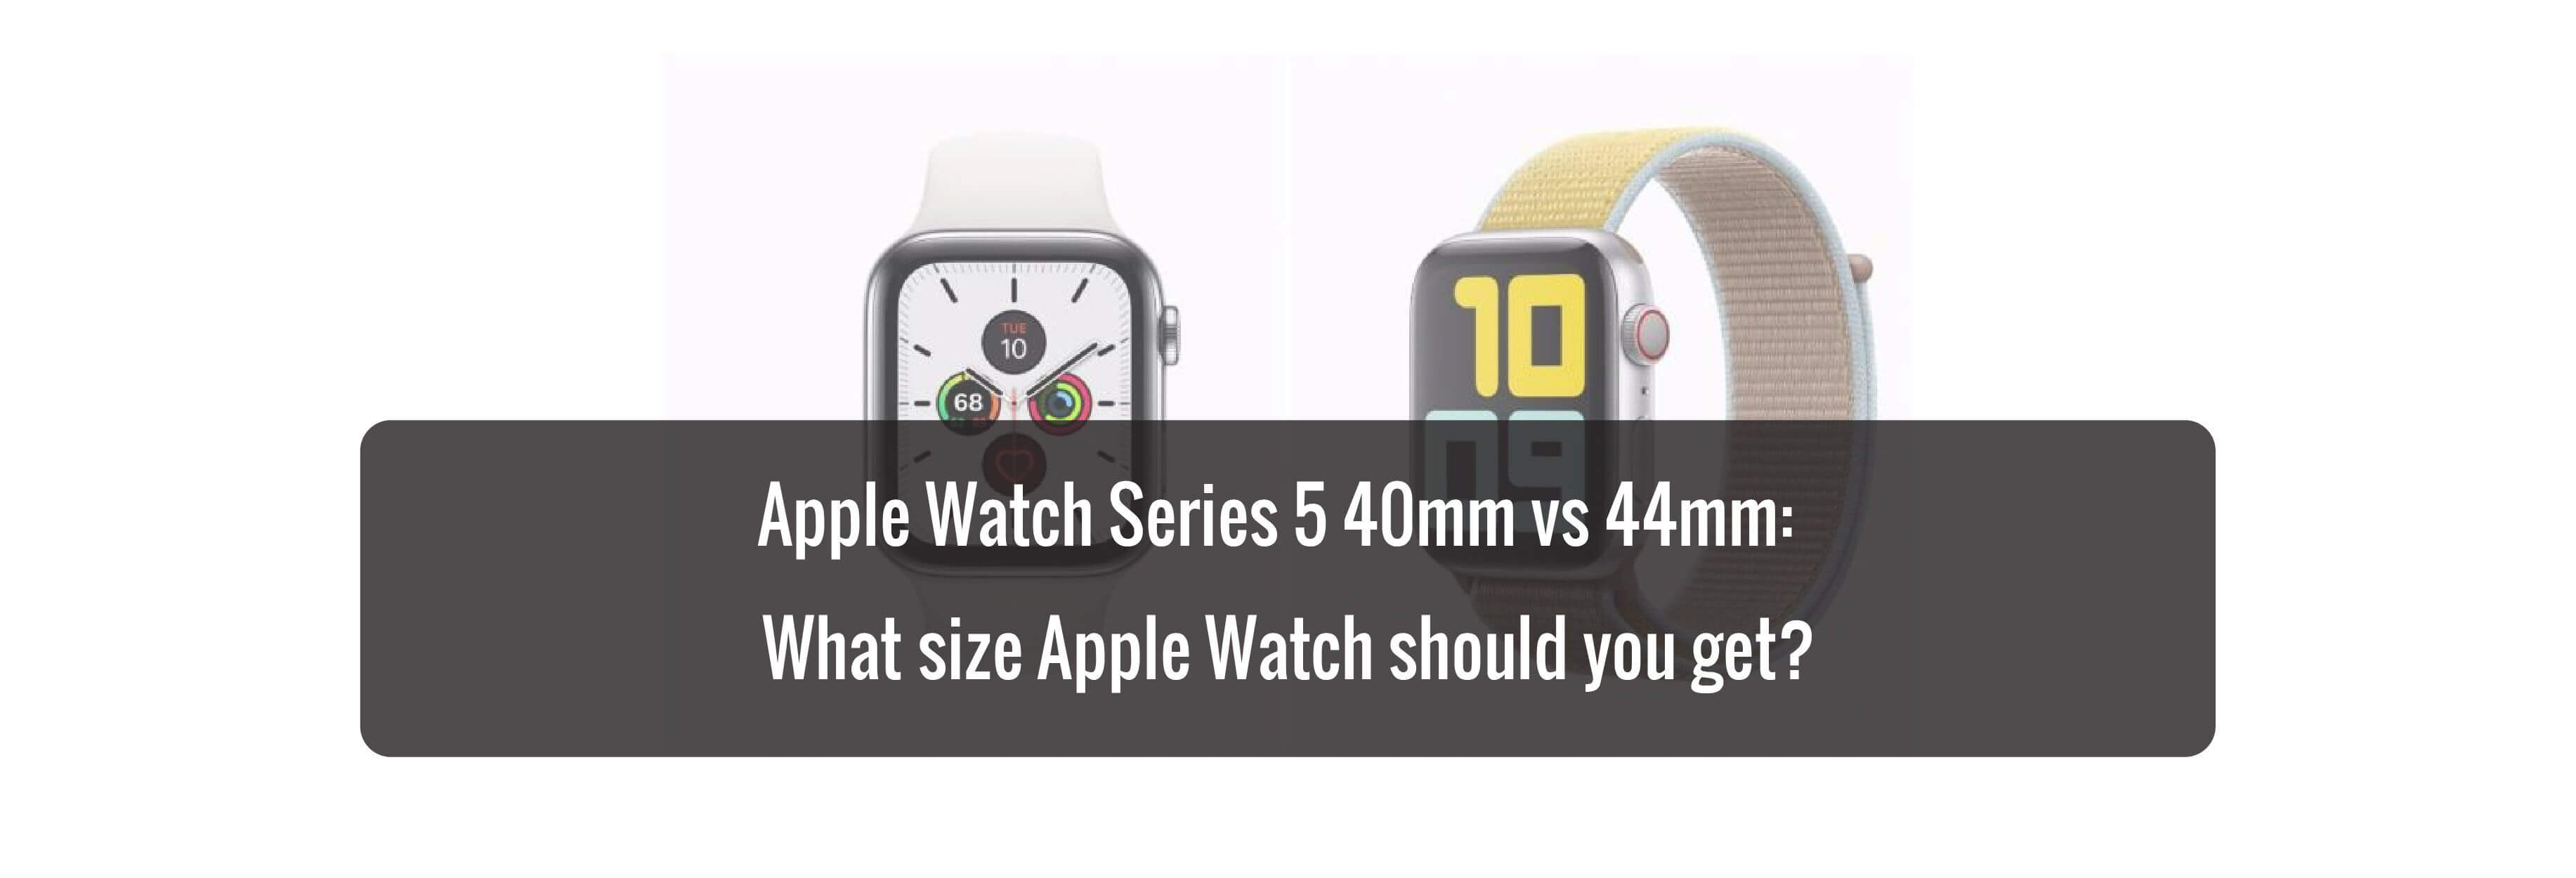 Apple Watch Series 5 40mm vs 44mm:  What size Apple Watch should you get?